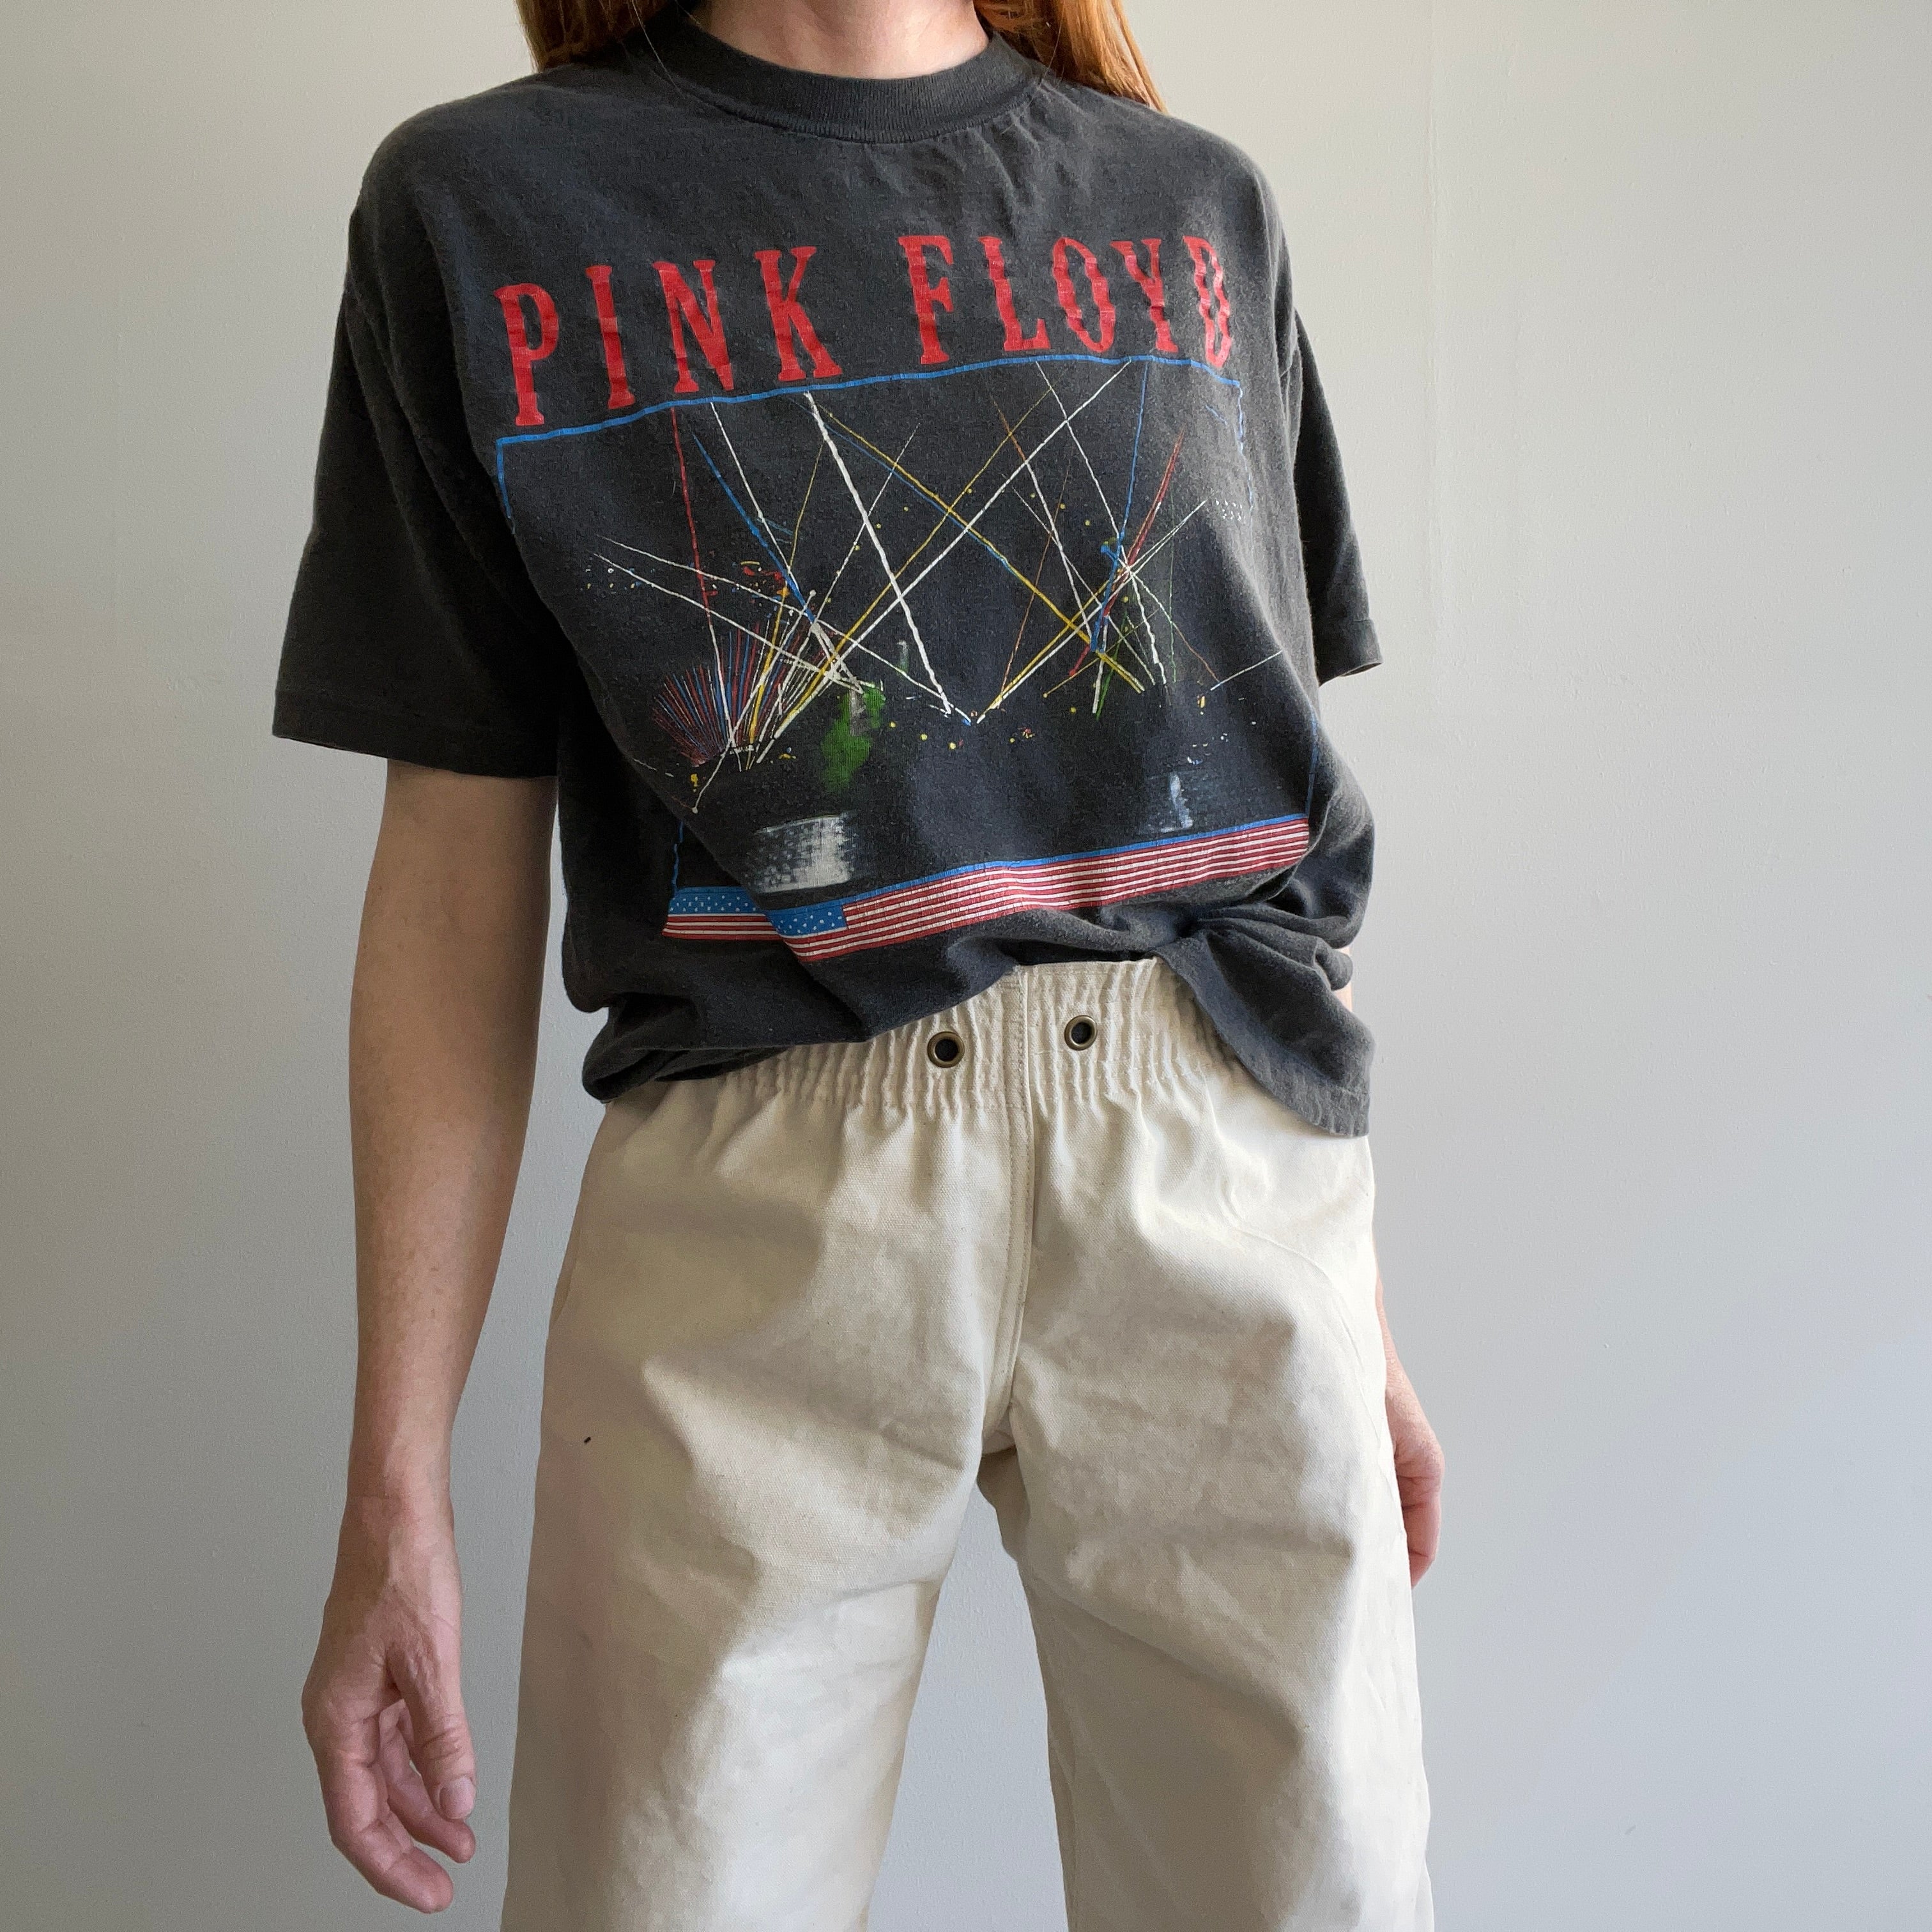 1987 Pink Floyd Tour T-Shirt with Armpit Hole - Swoooon